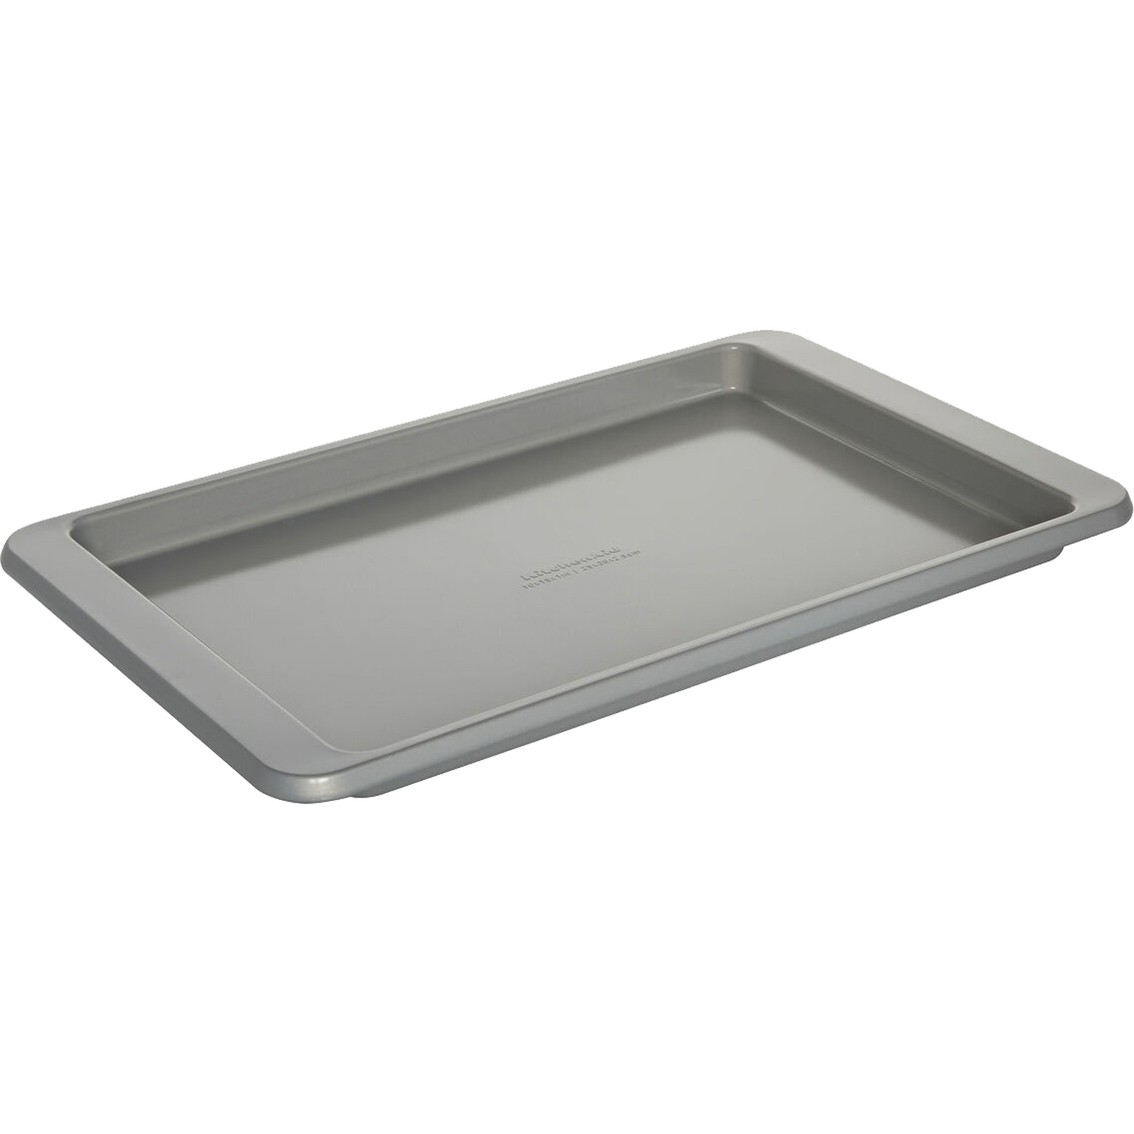 Kitchen Aid 10 in. x 15 in. Baking Sheet - Image 2 of 3